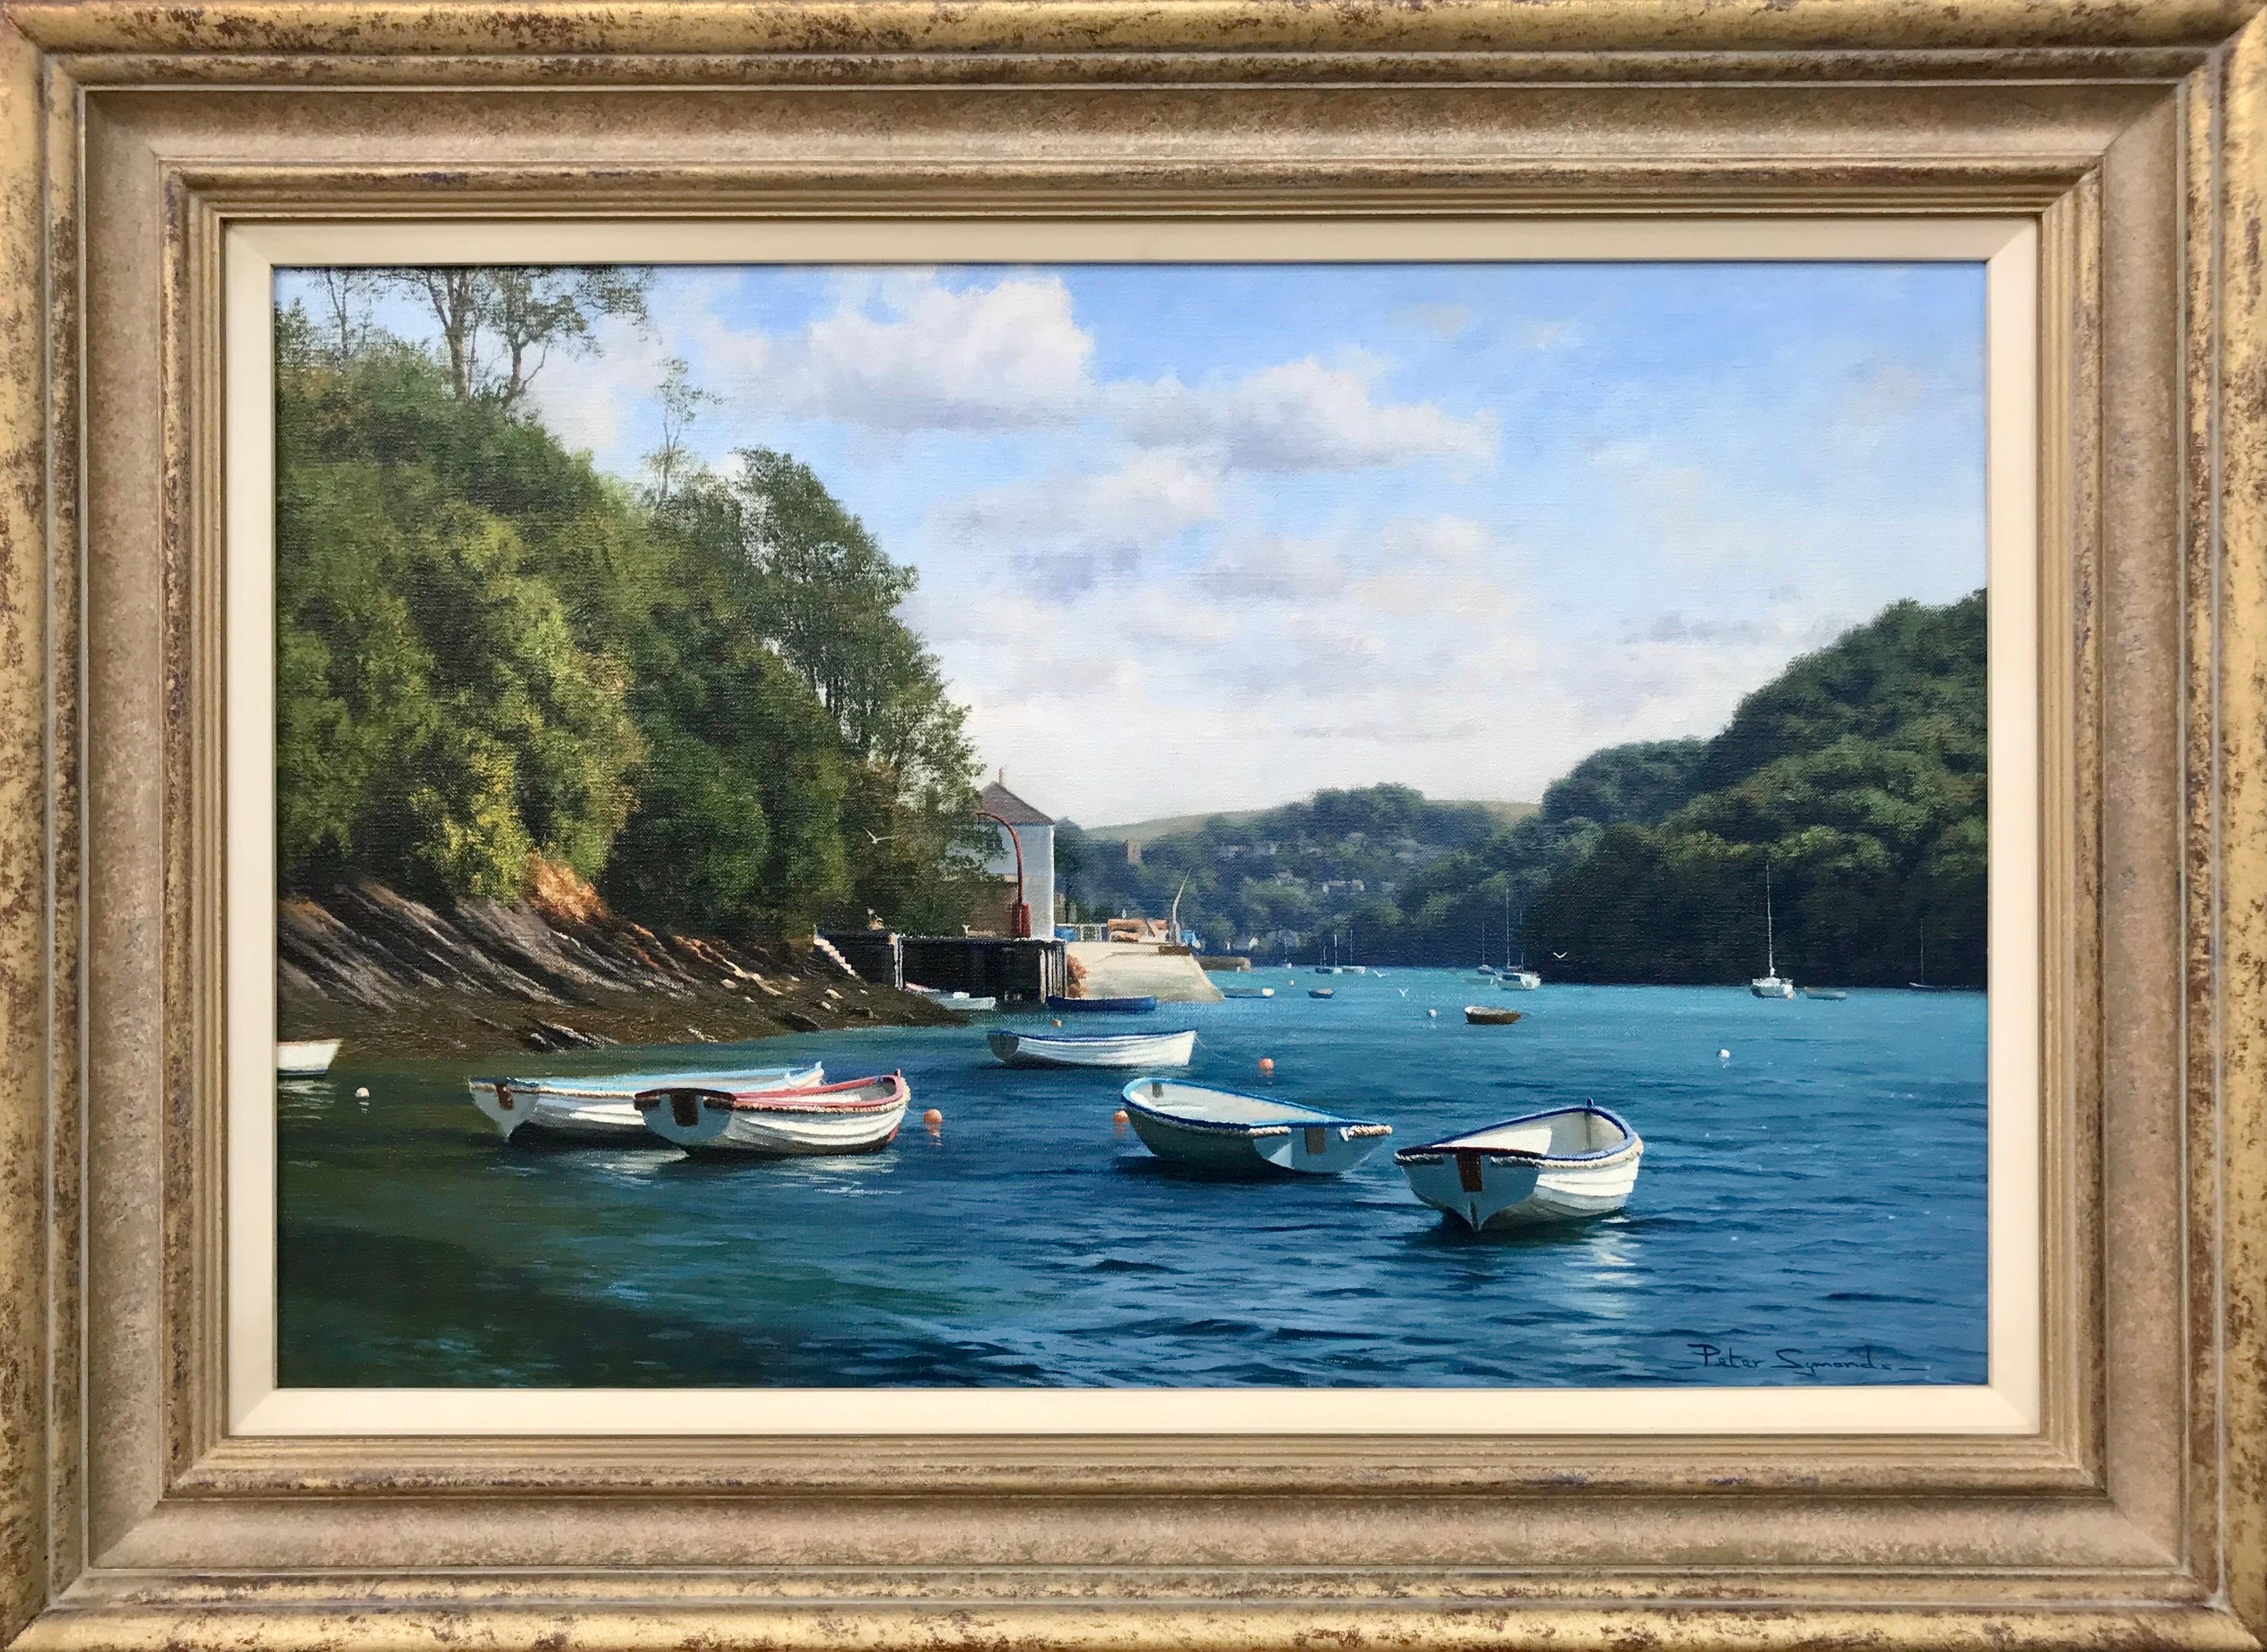 Peter Symonds Landscape Painting - Oil Painting of Boats on River Yealm Devon England by British Landscape Artist